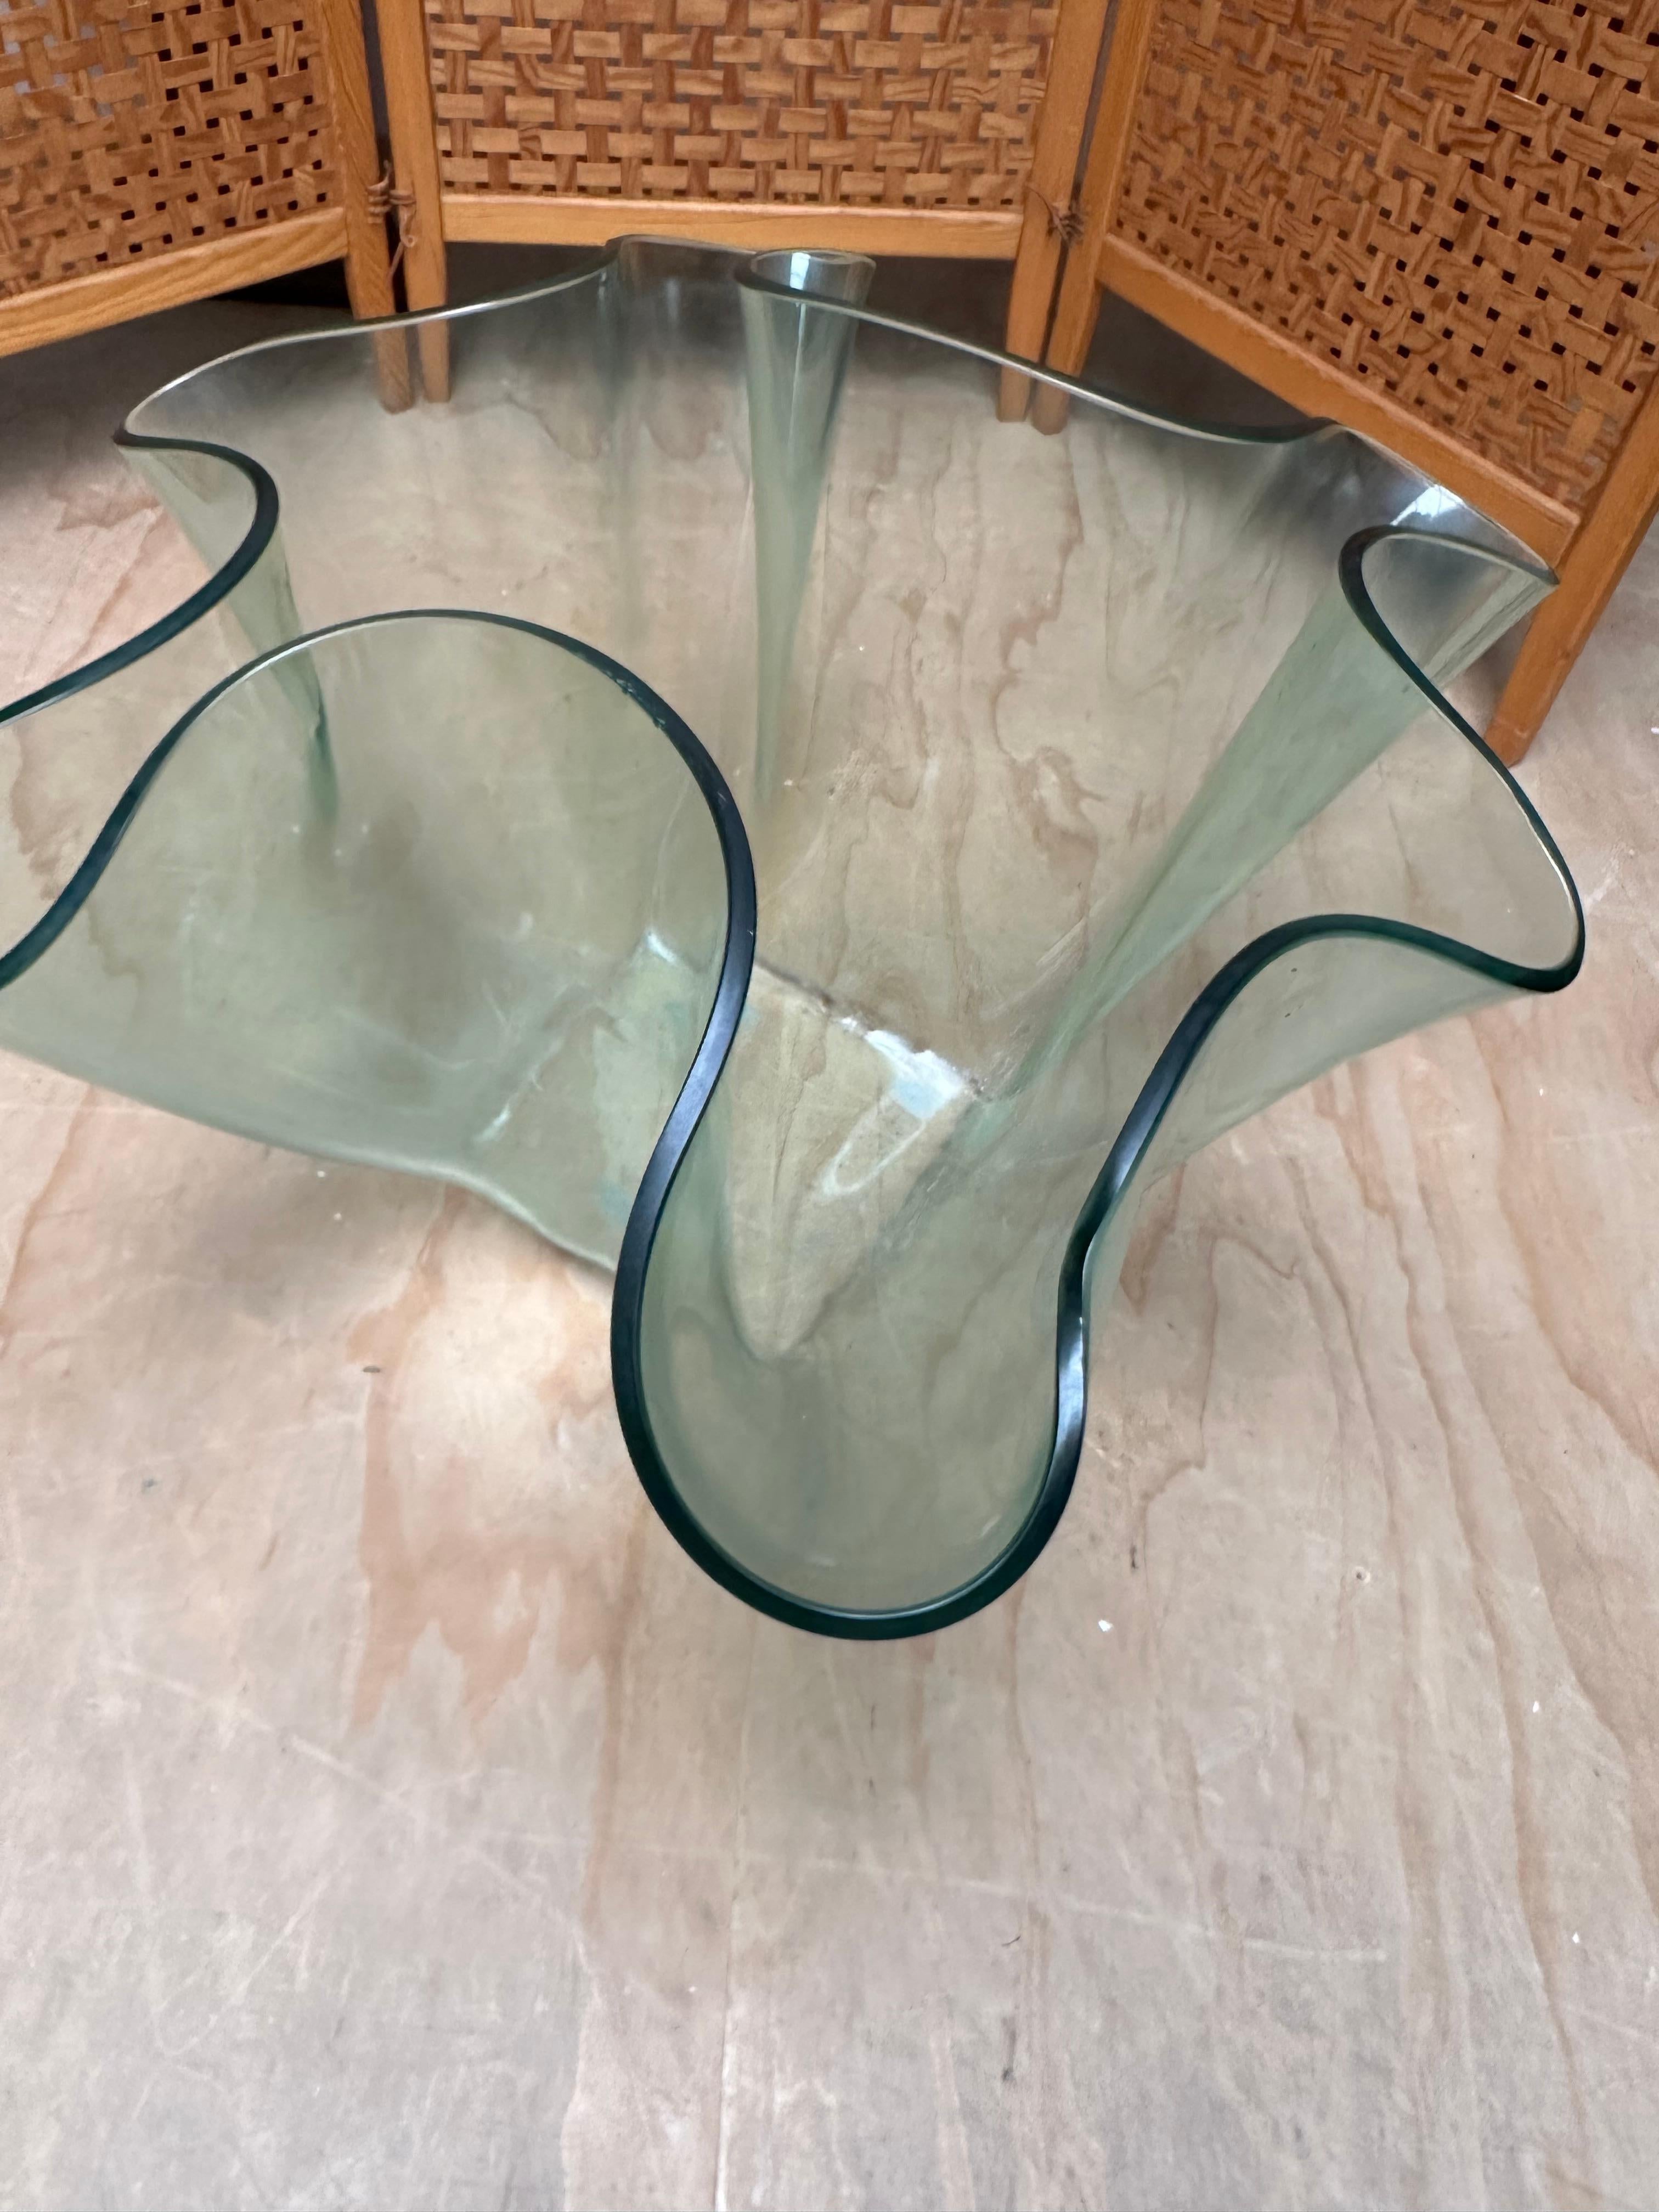 Exceptional Strong & Thick Curved Design Murano, Glass Art Floor Jardiniere Vase For Sale 8